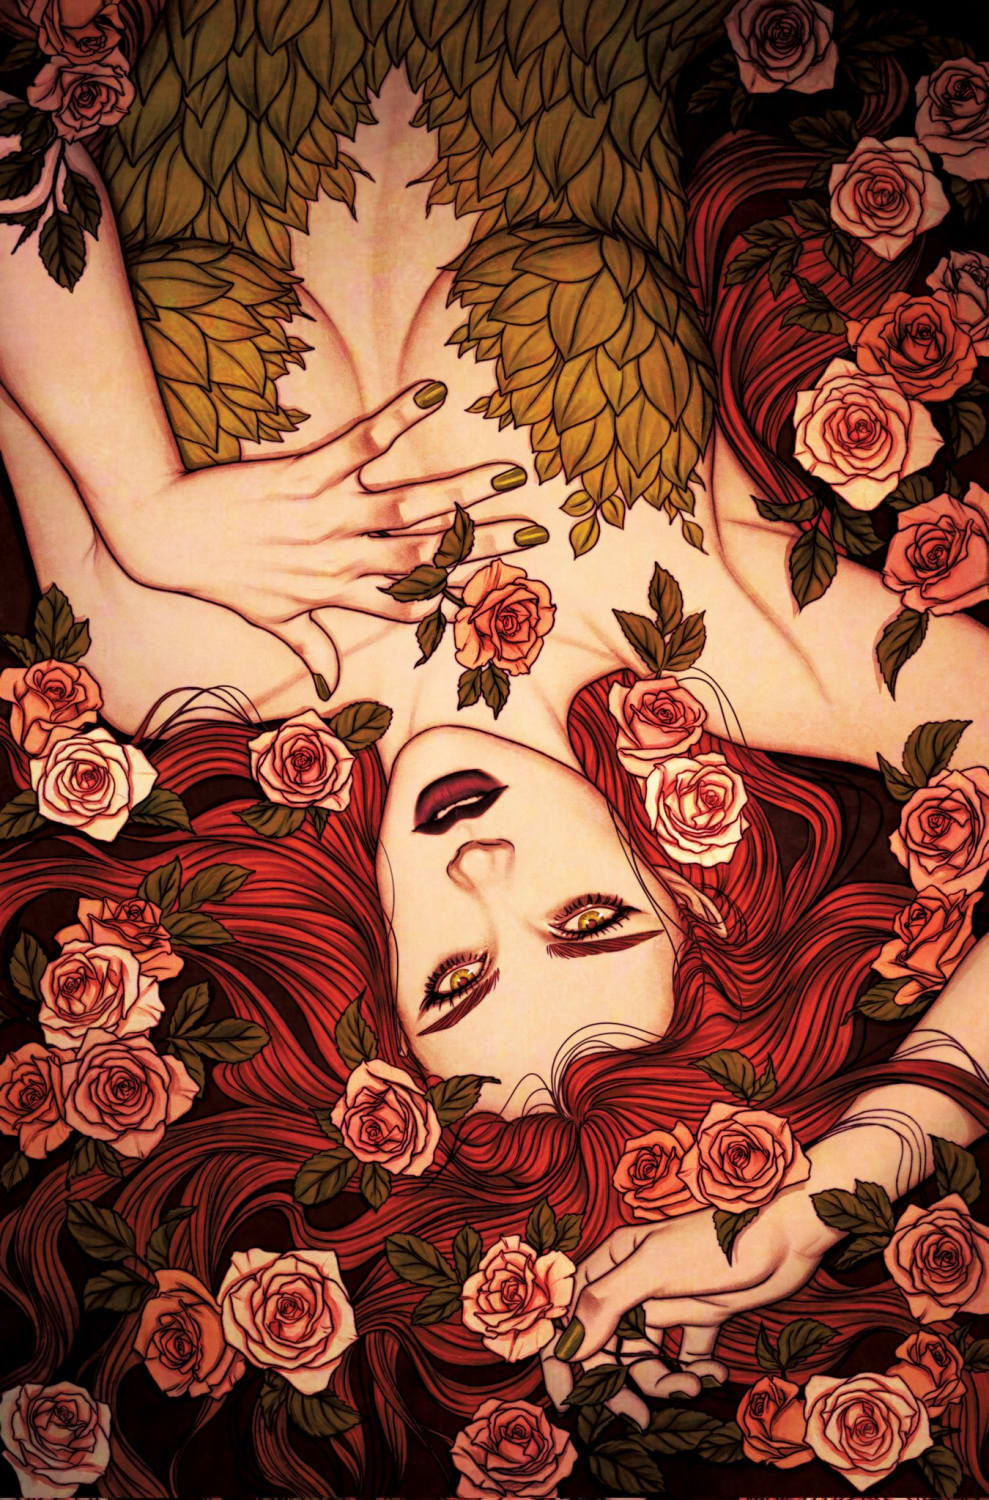 Poison Ivy #2 variant cover by Jenny Frison